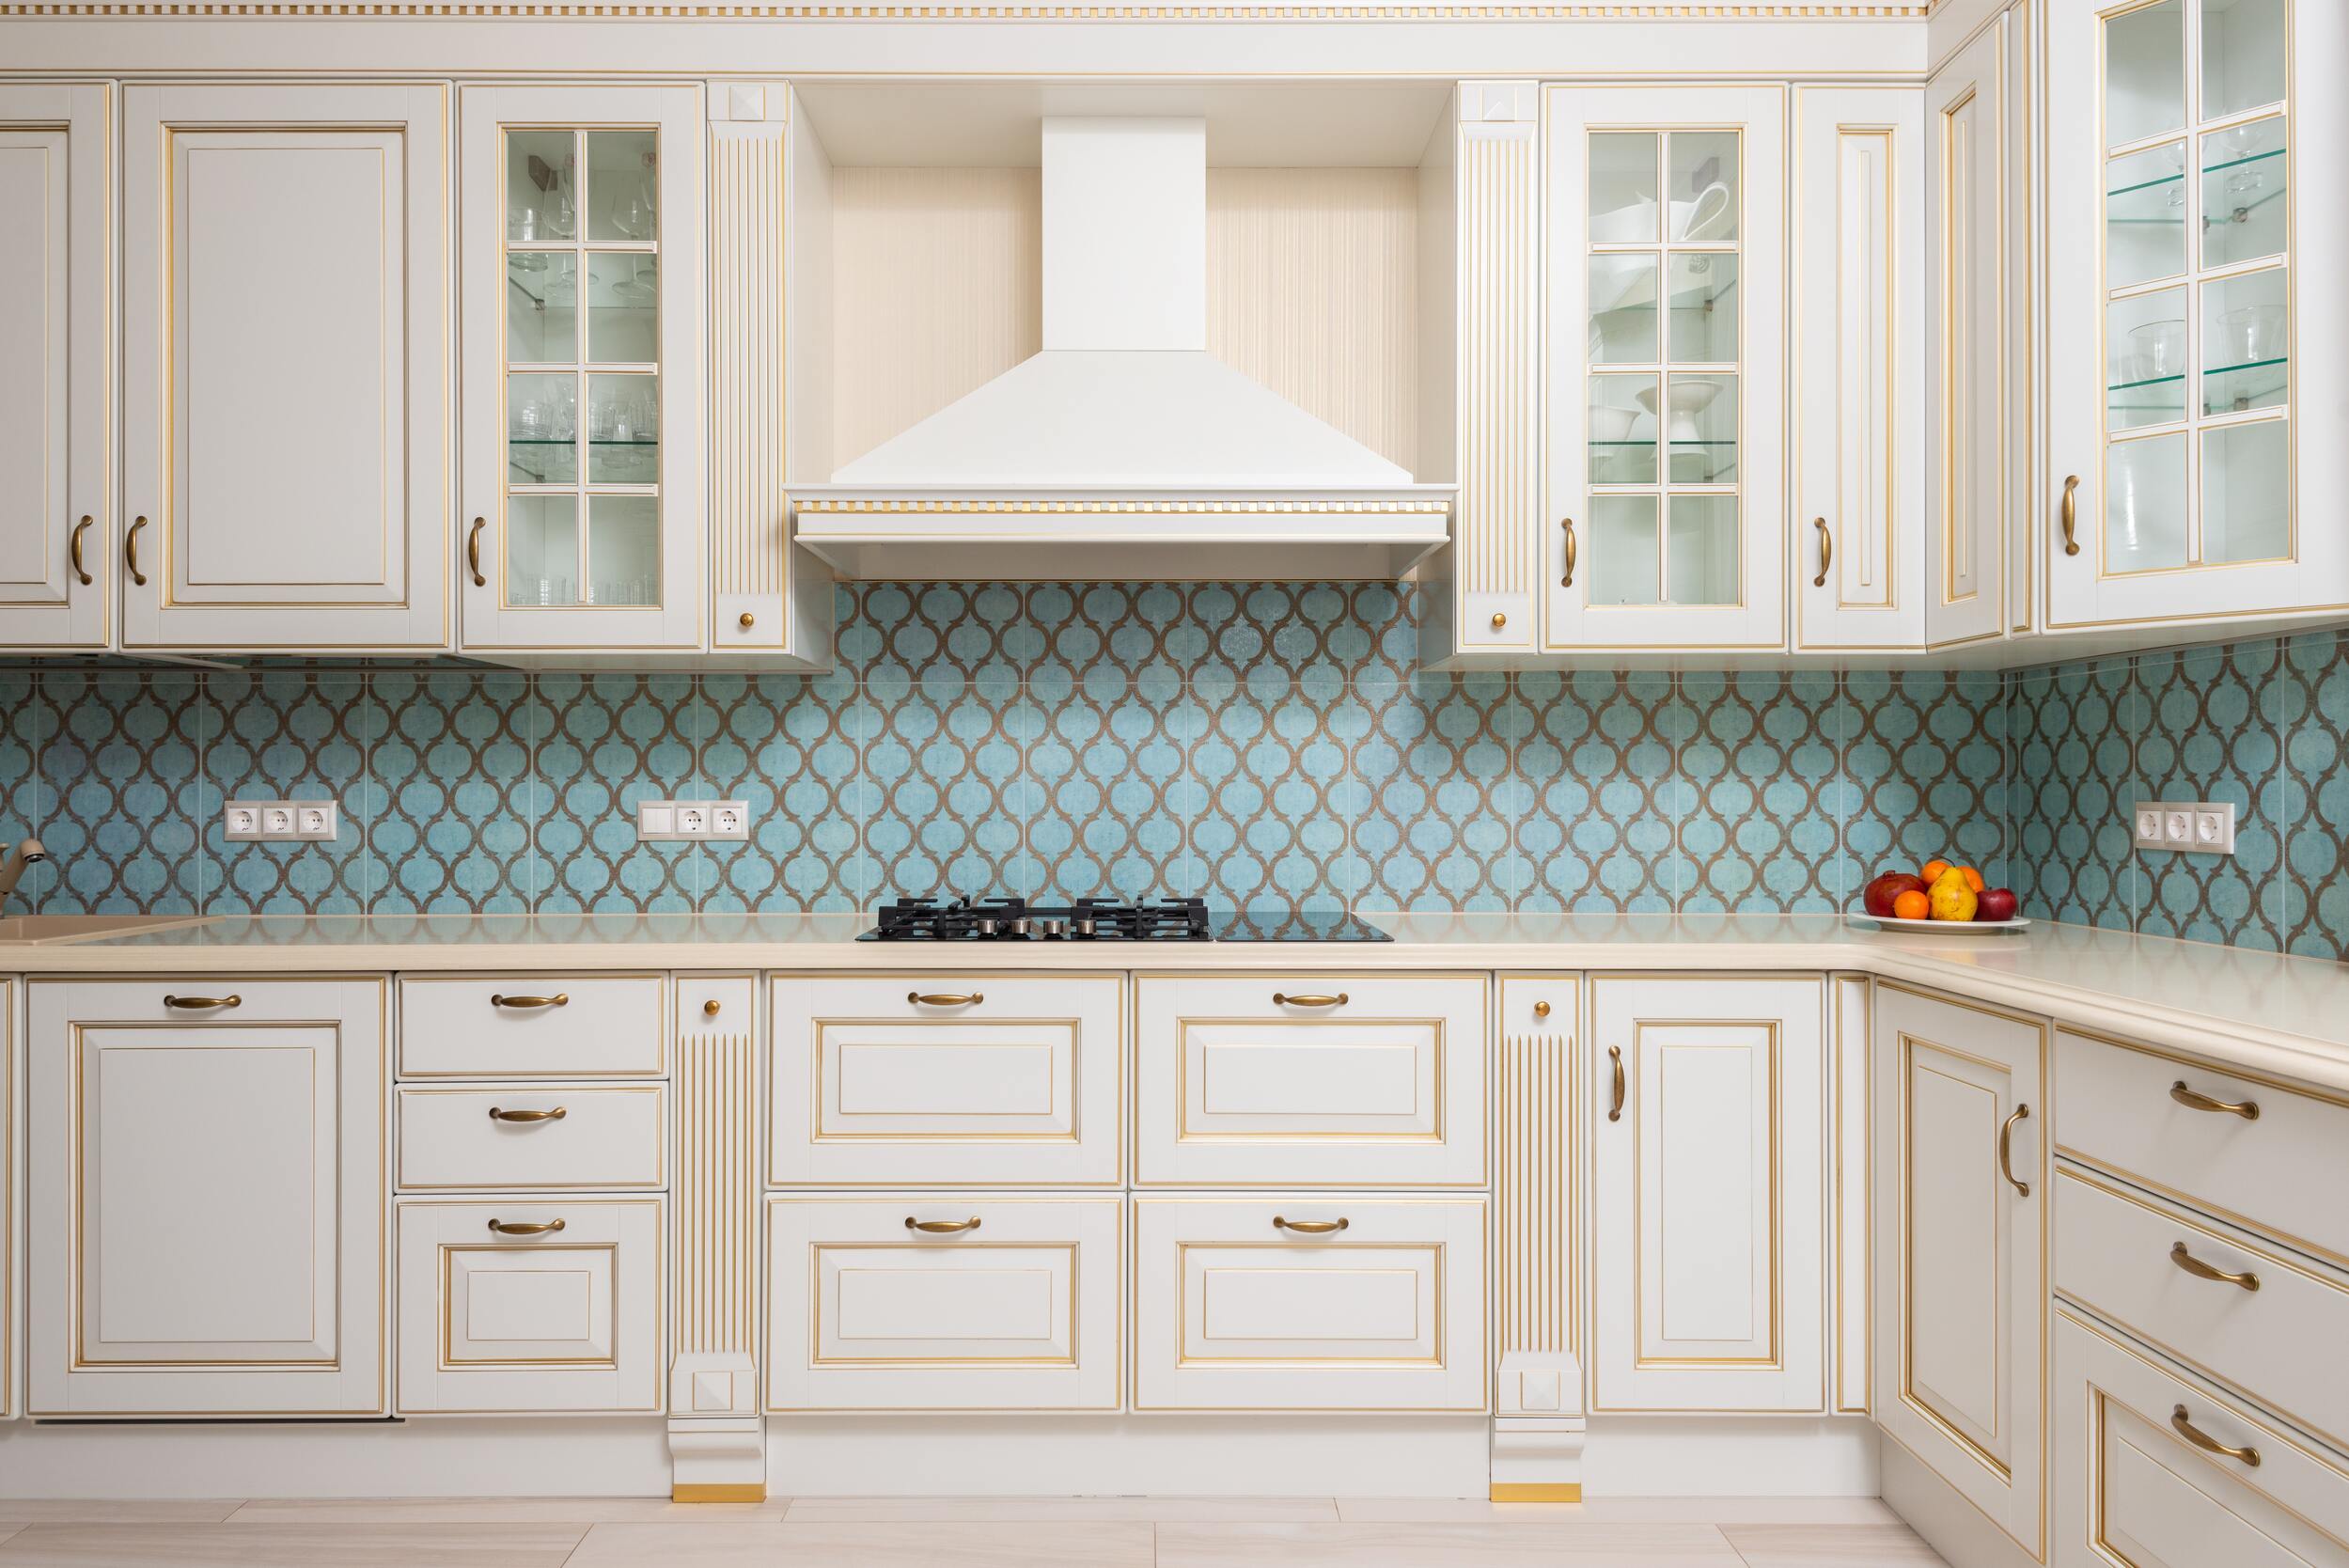 Important Questions to Ask Before Hiring a Kitchen Remodeling Contractor